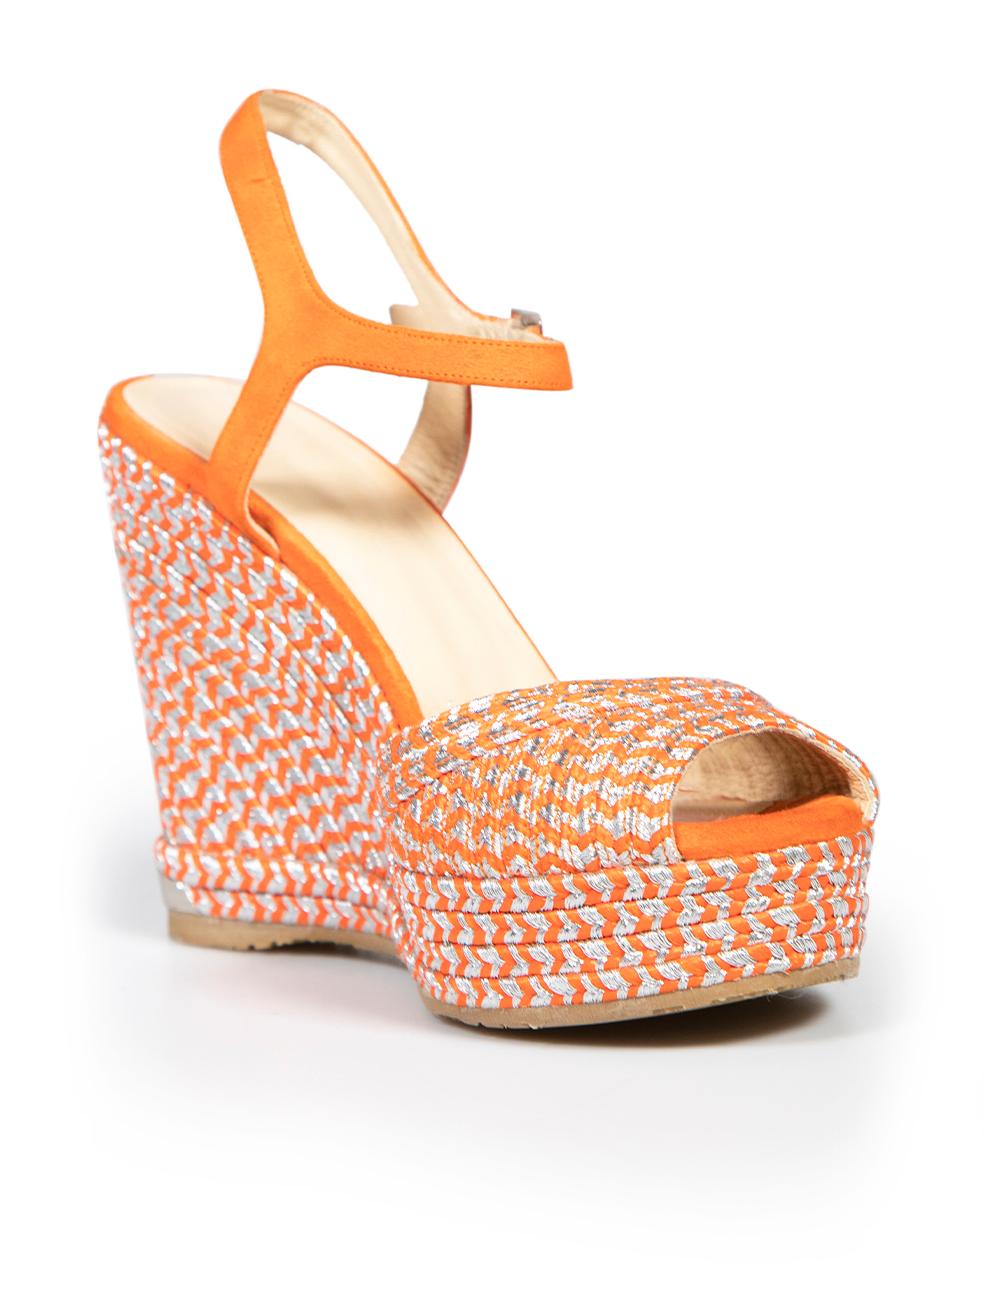 CONDITION is Very good. Minimal wear to wedges is evident. Minimal wear to suede insoles and suede straps on this used Jimmy Choo designer resale item.
 
 
 
 Details
 
 
 Mode: Perla 120
 
 Orange
 
 Cloth
 
 Wedges
 
 Silver metallic woven